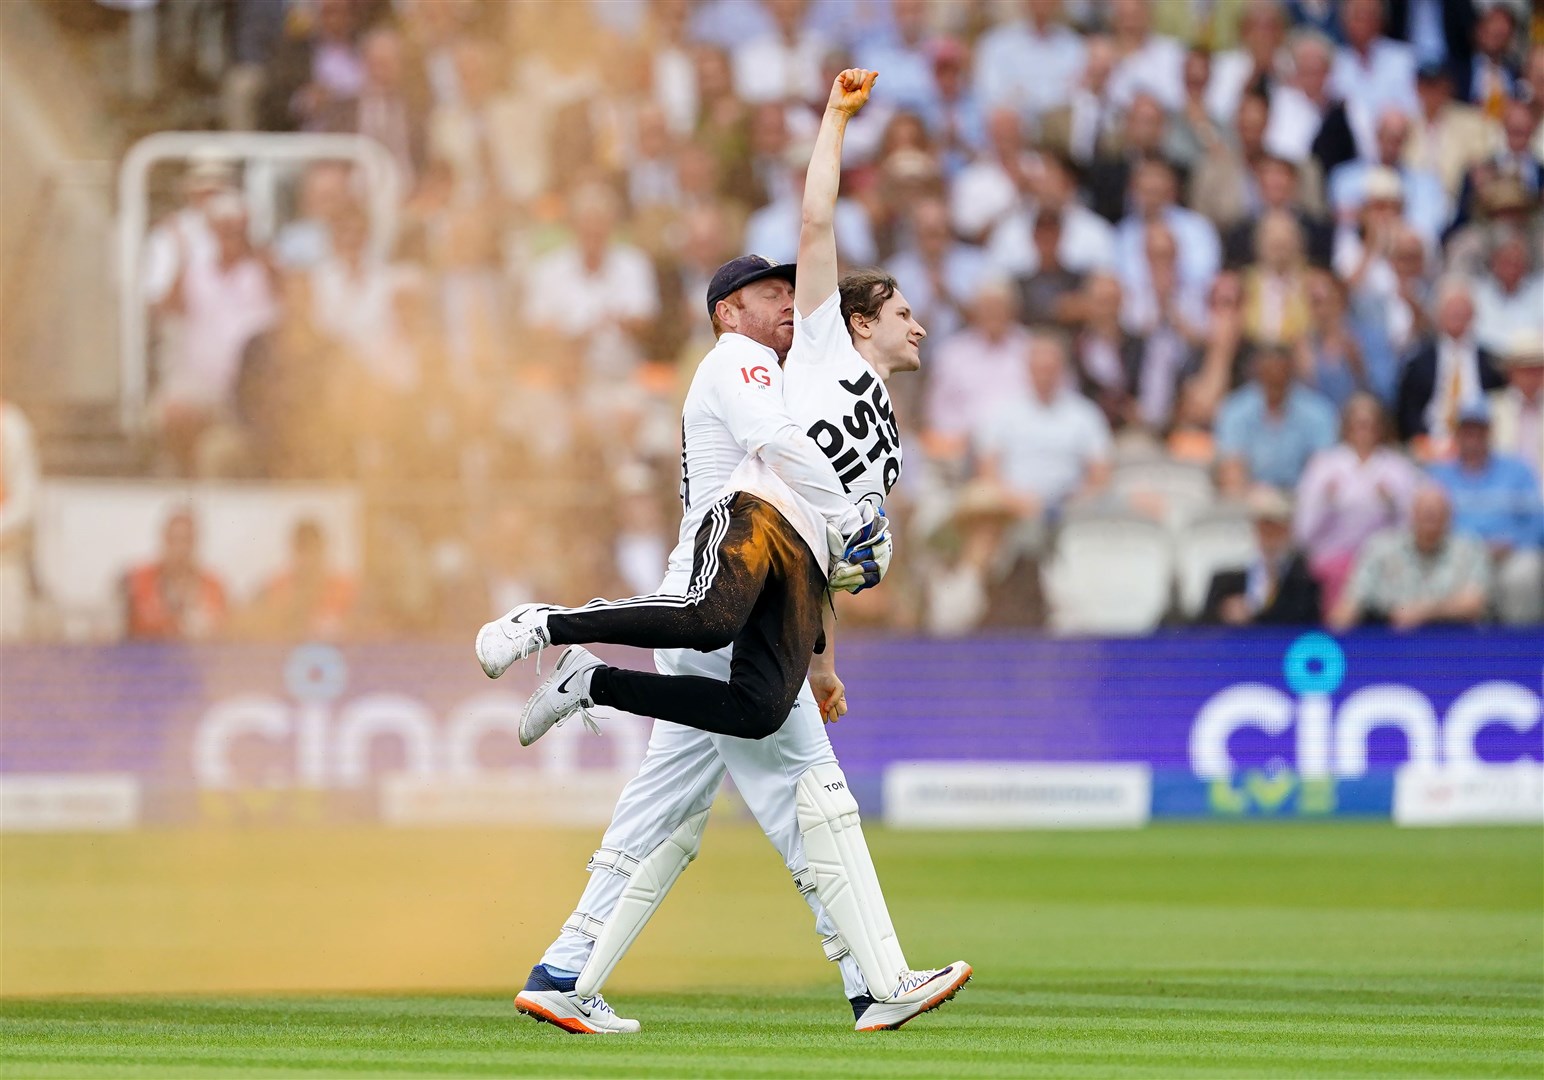 England’s Jonny Bairstow removes a Just Stop Oil protester from the pitch during day one of the second Ashes Test match at Lords, London, in June (Mike Egerton/PA)